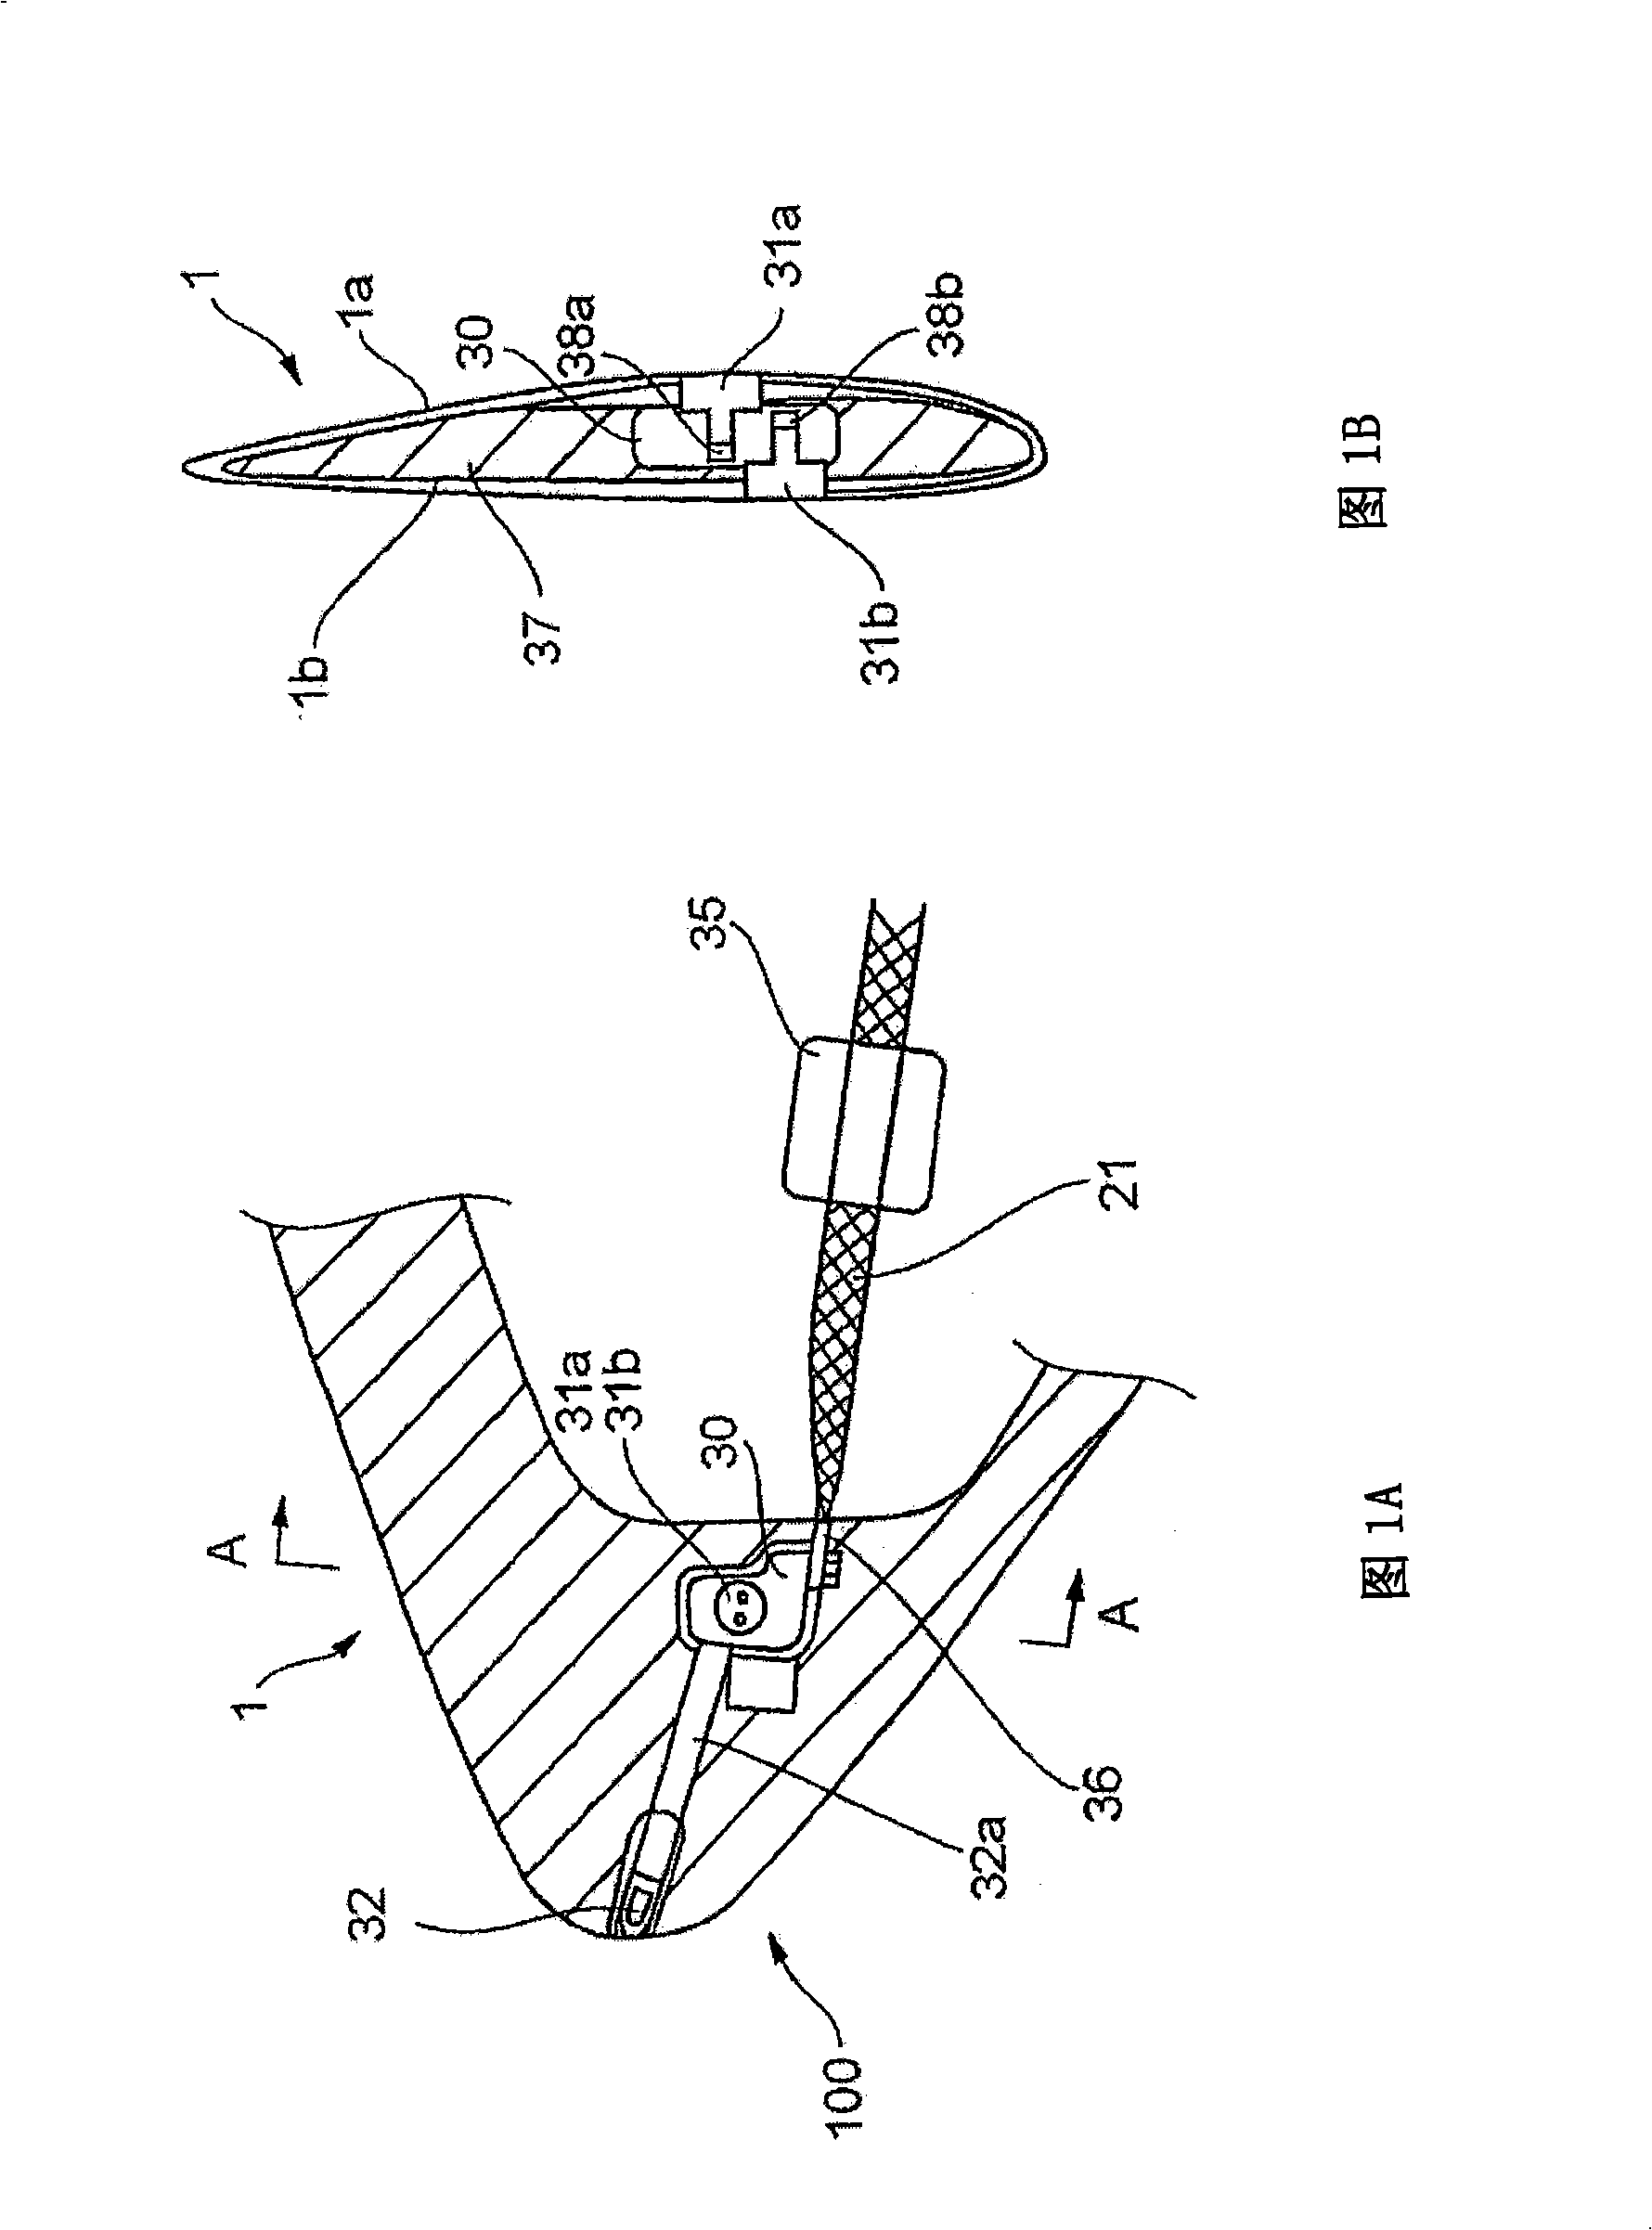 Lightning protection device of windmill blade